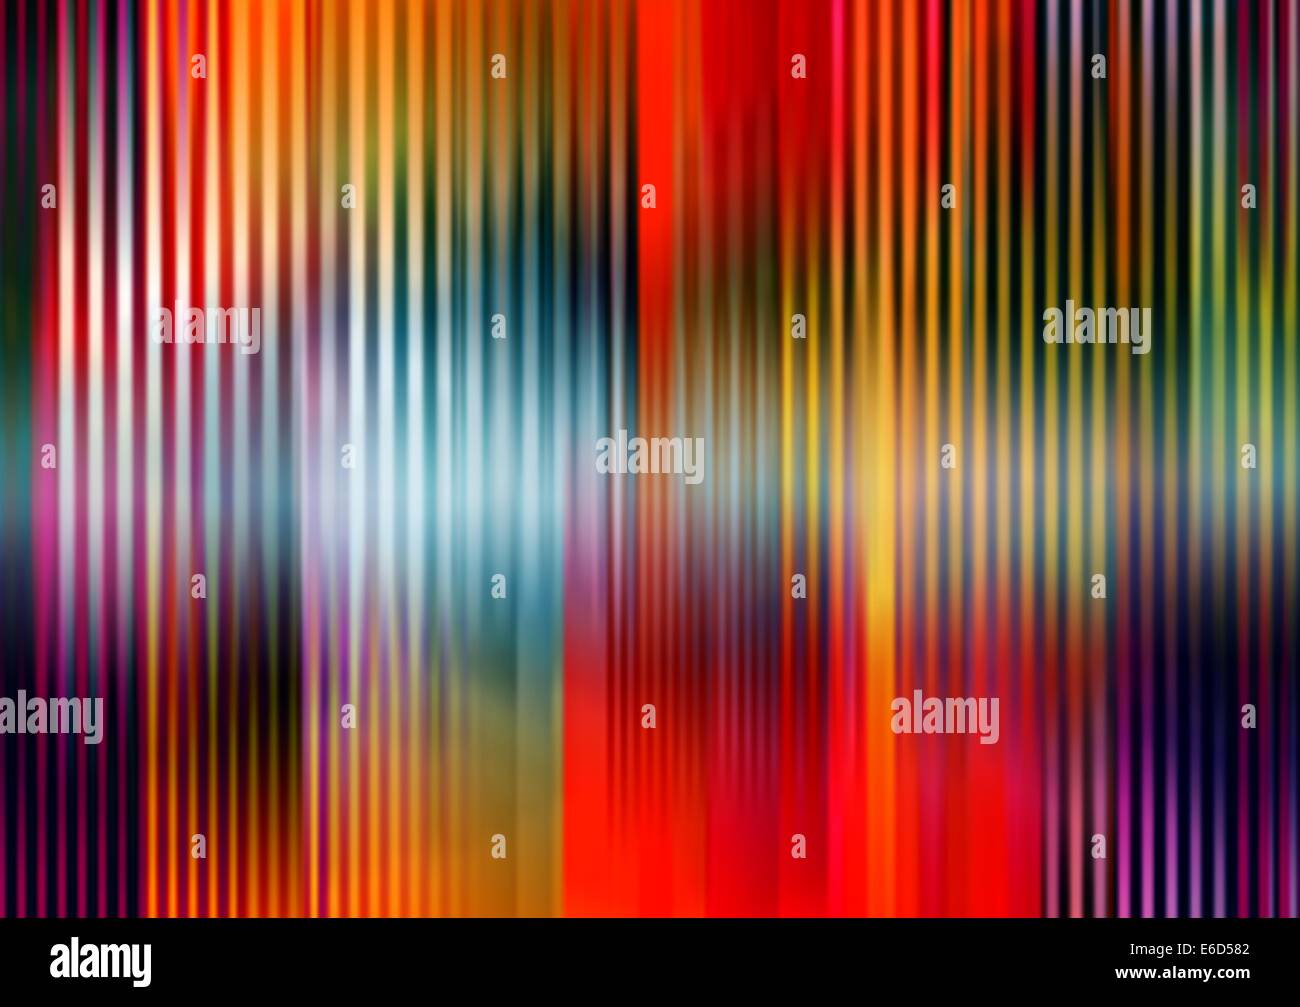 Editable vector abstract background of colorful stripes made using a single gradient mesh Stock Vector